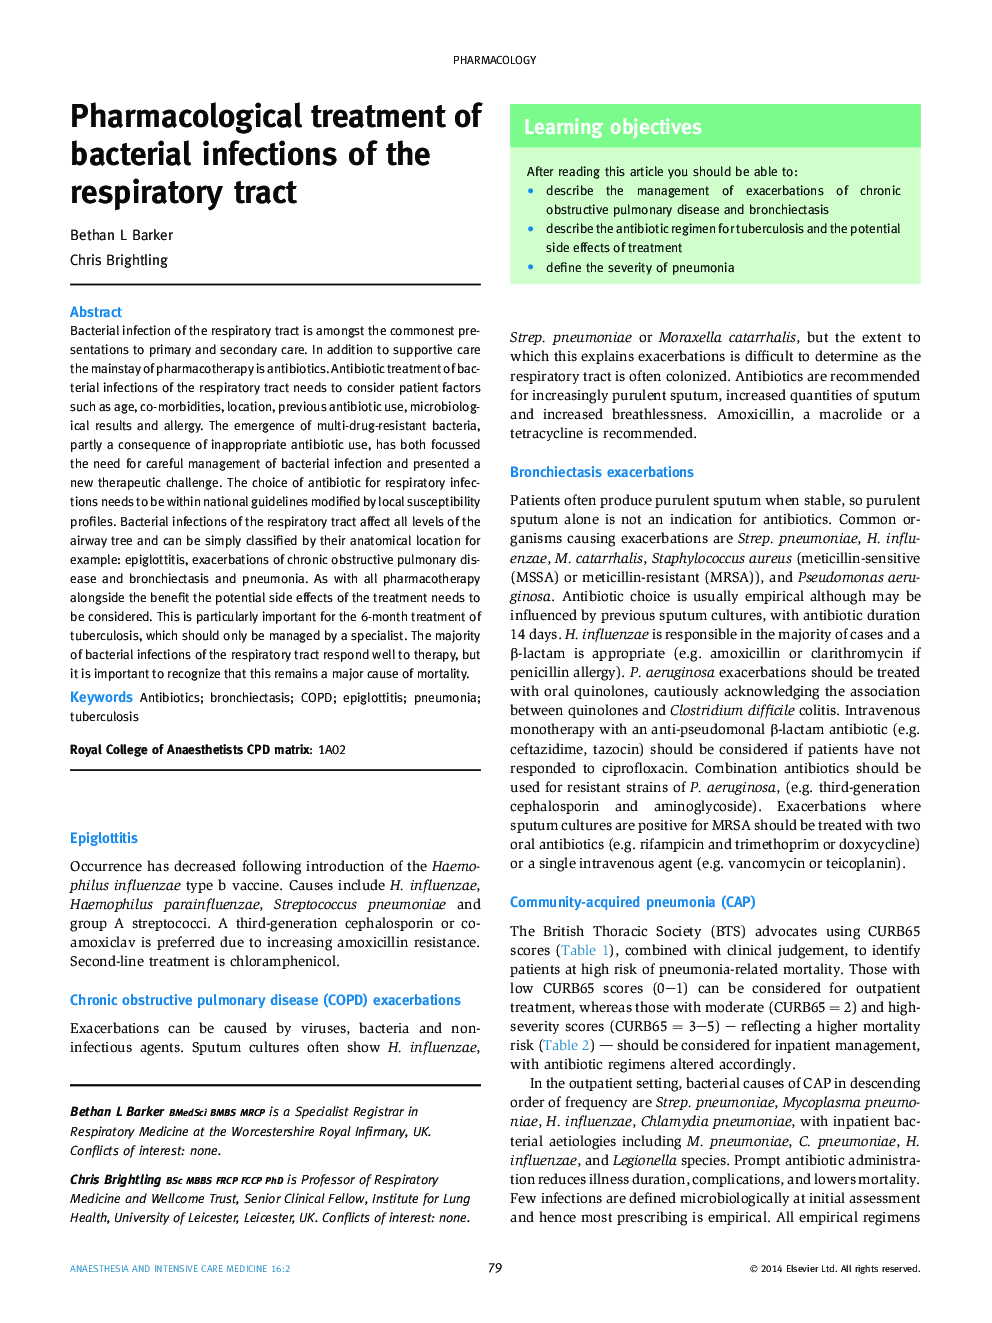 Pharmacological treatment of bacterial infections of the respiratory tract